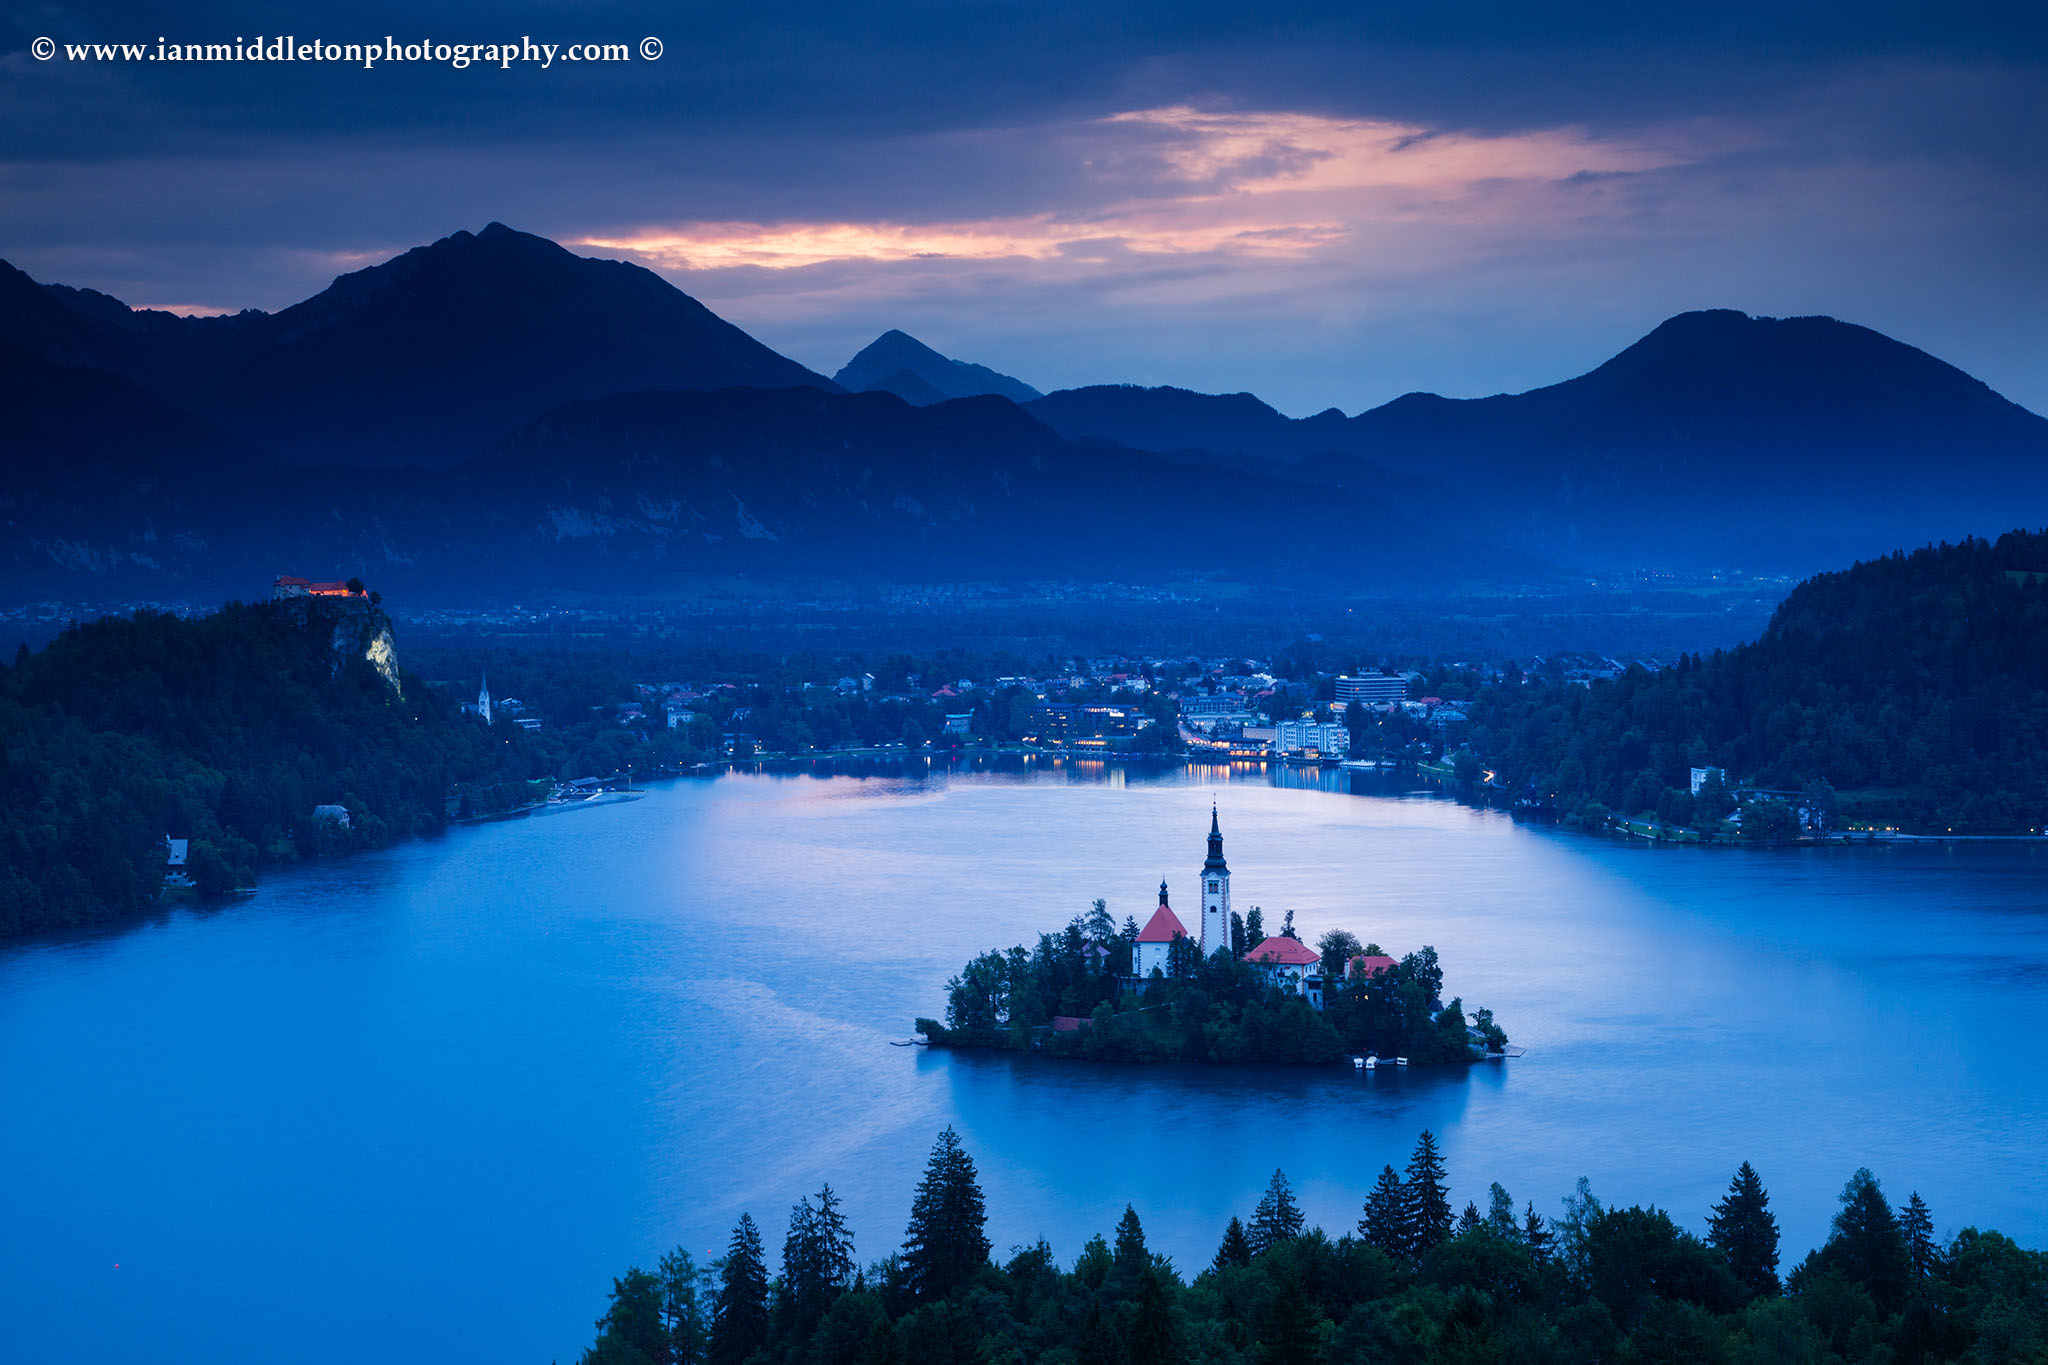 View across Lake Bled to the island church and clifftop castle from Ojstrica, Slovenia.